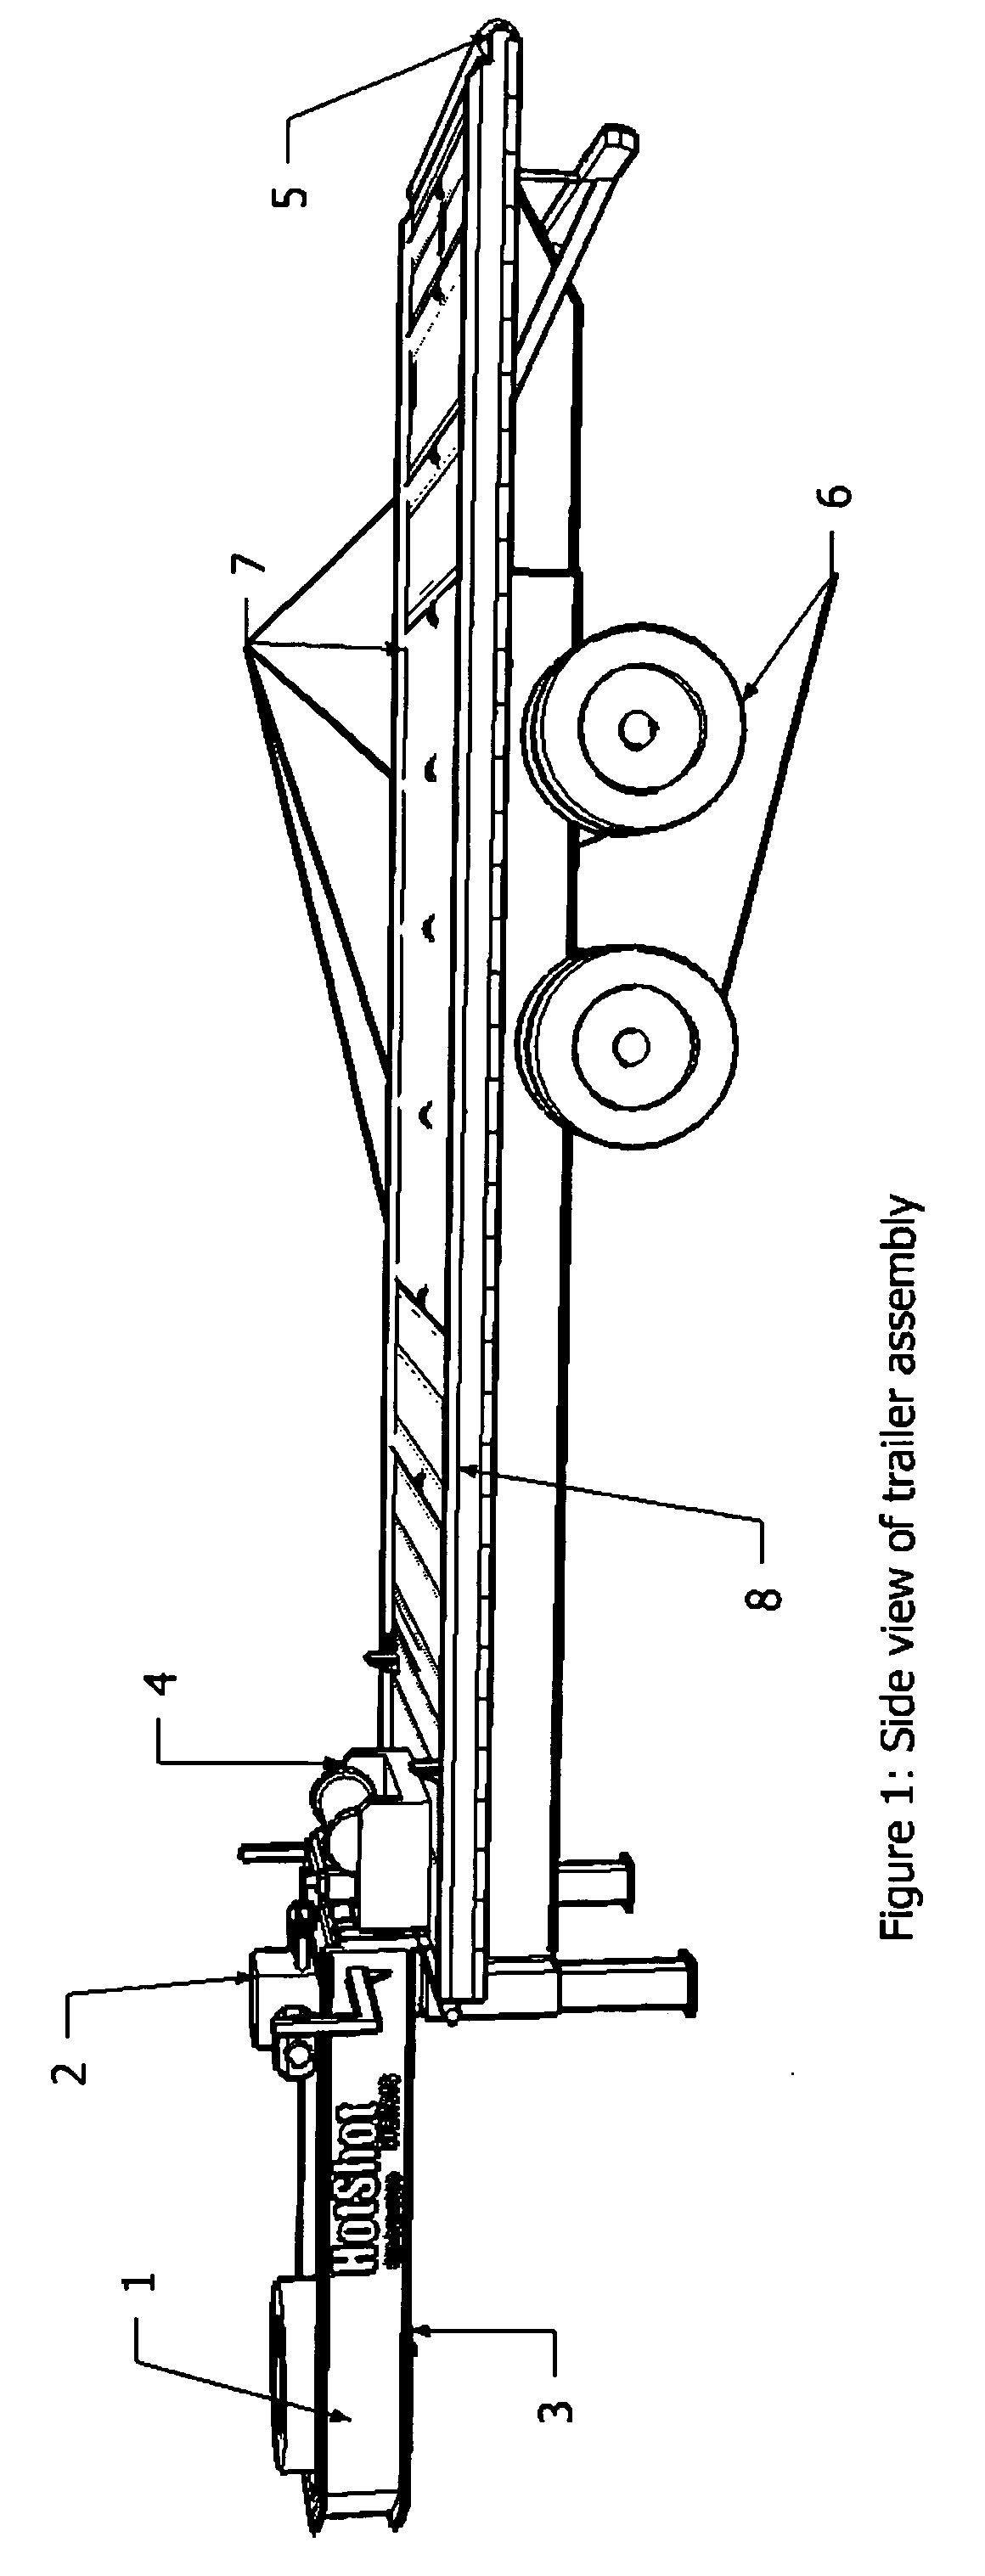 Tilting Flatbed Trailer for Loading, Transporting, Unloading and Placement of Heavy Field Equipment